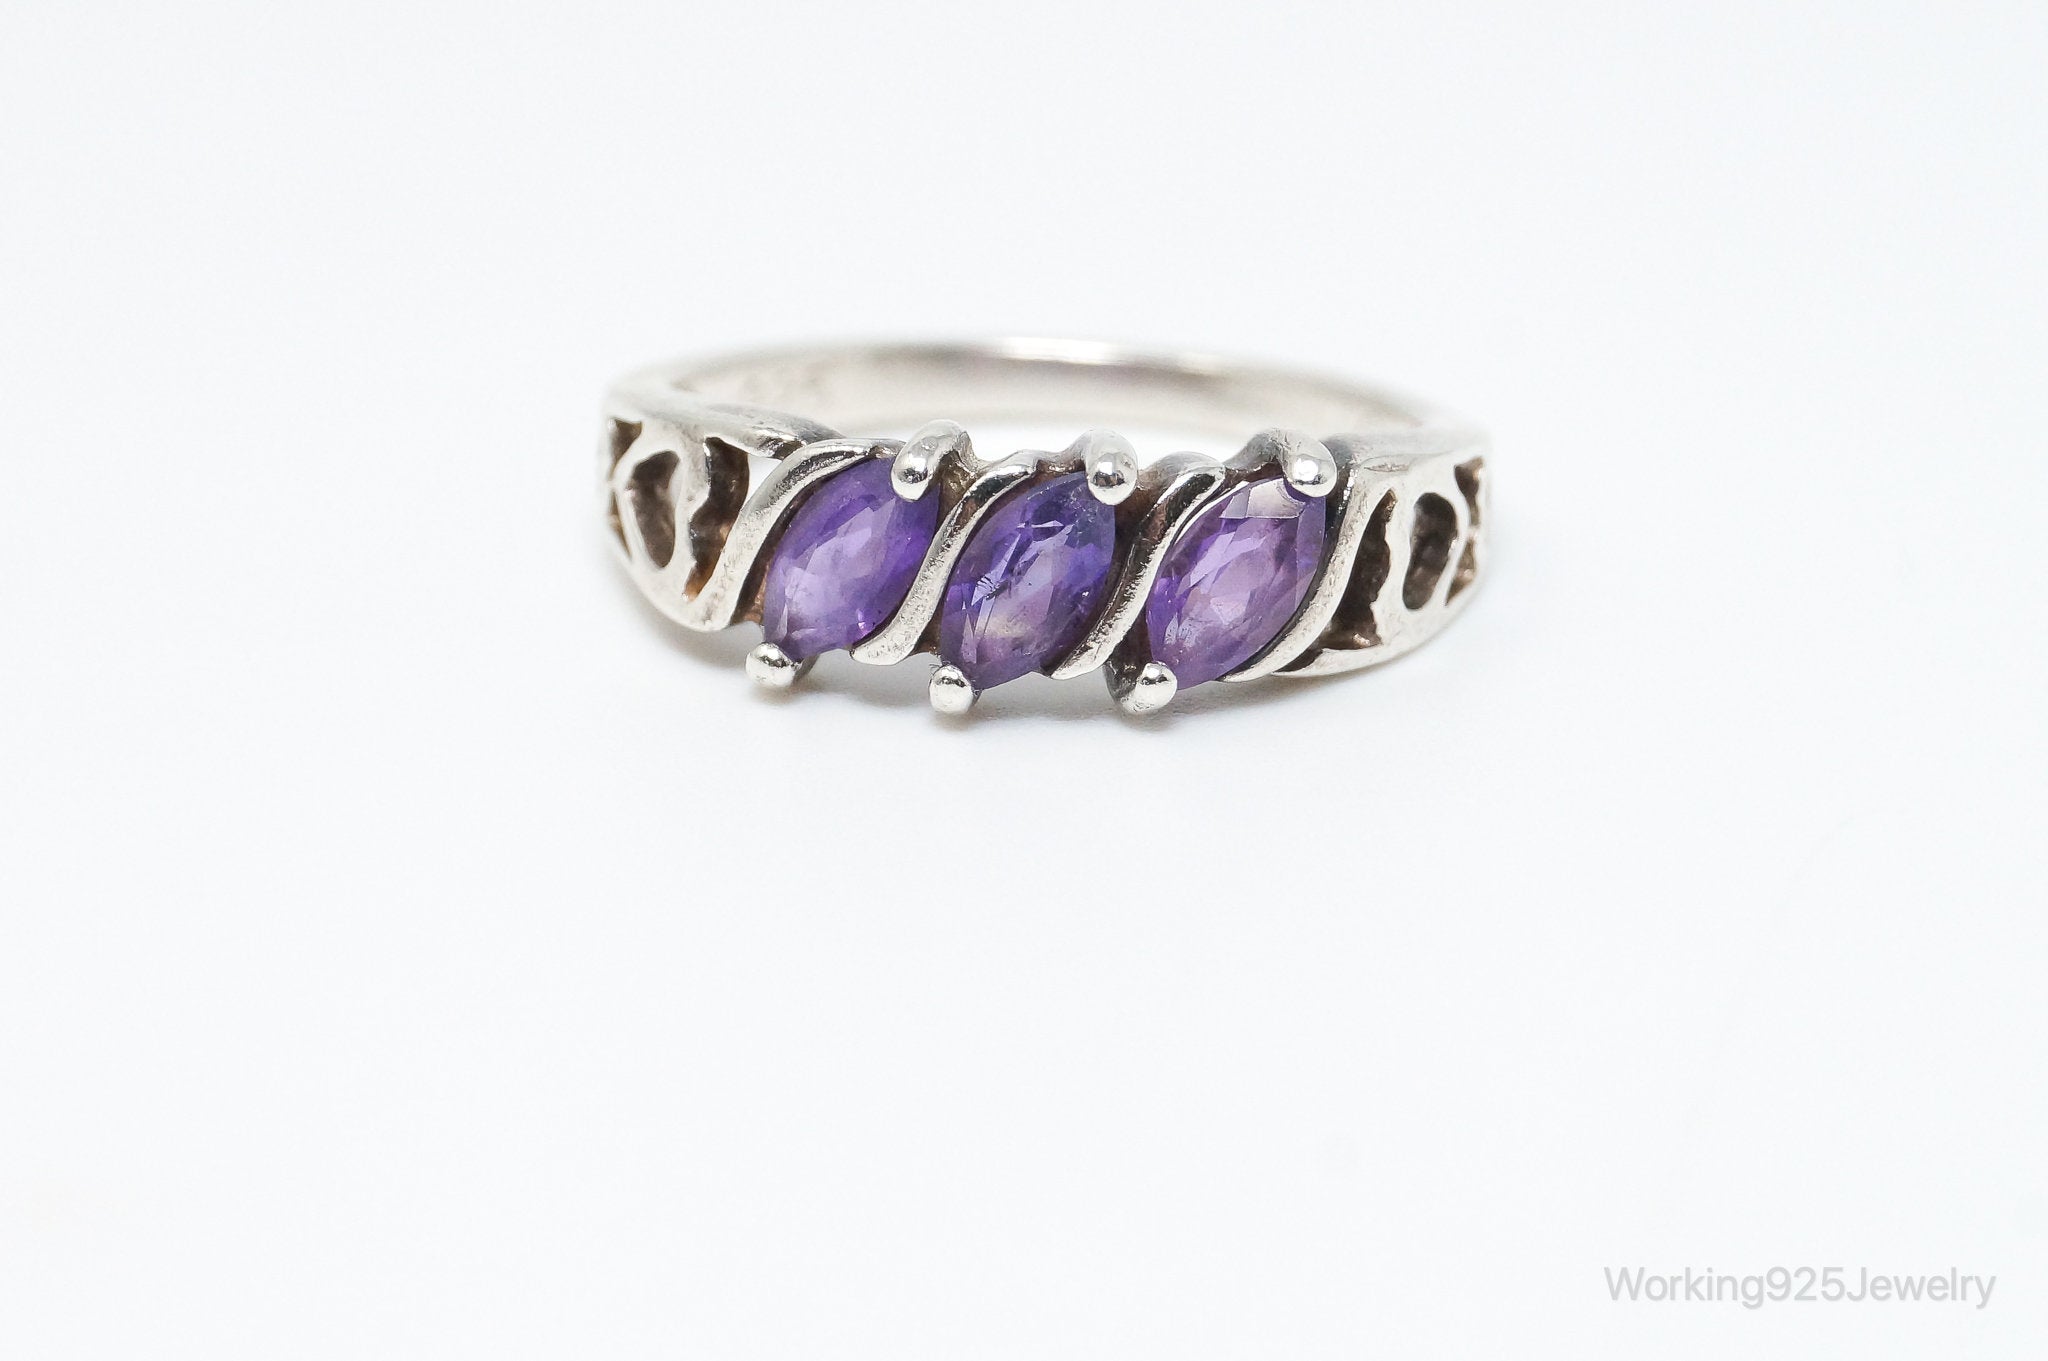 Vintage Amethyst Heart Cut Outs Sterling Silver Ring - Size 6.75